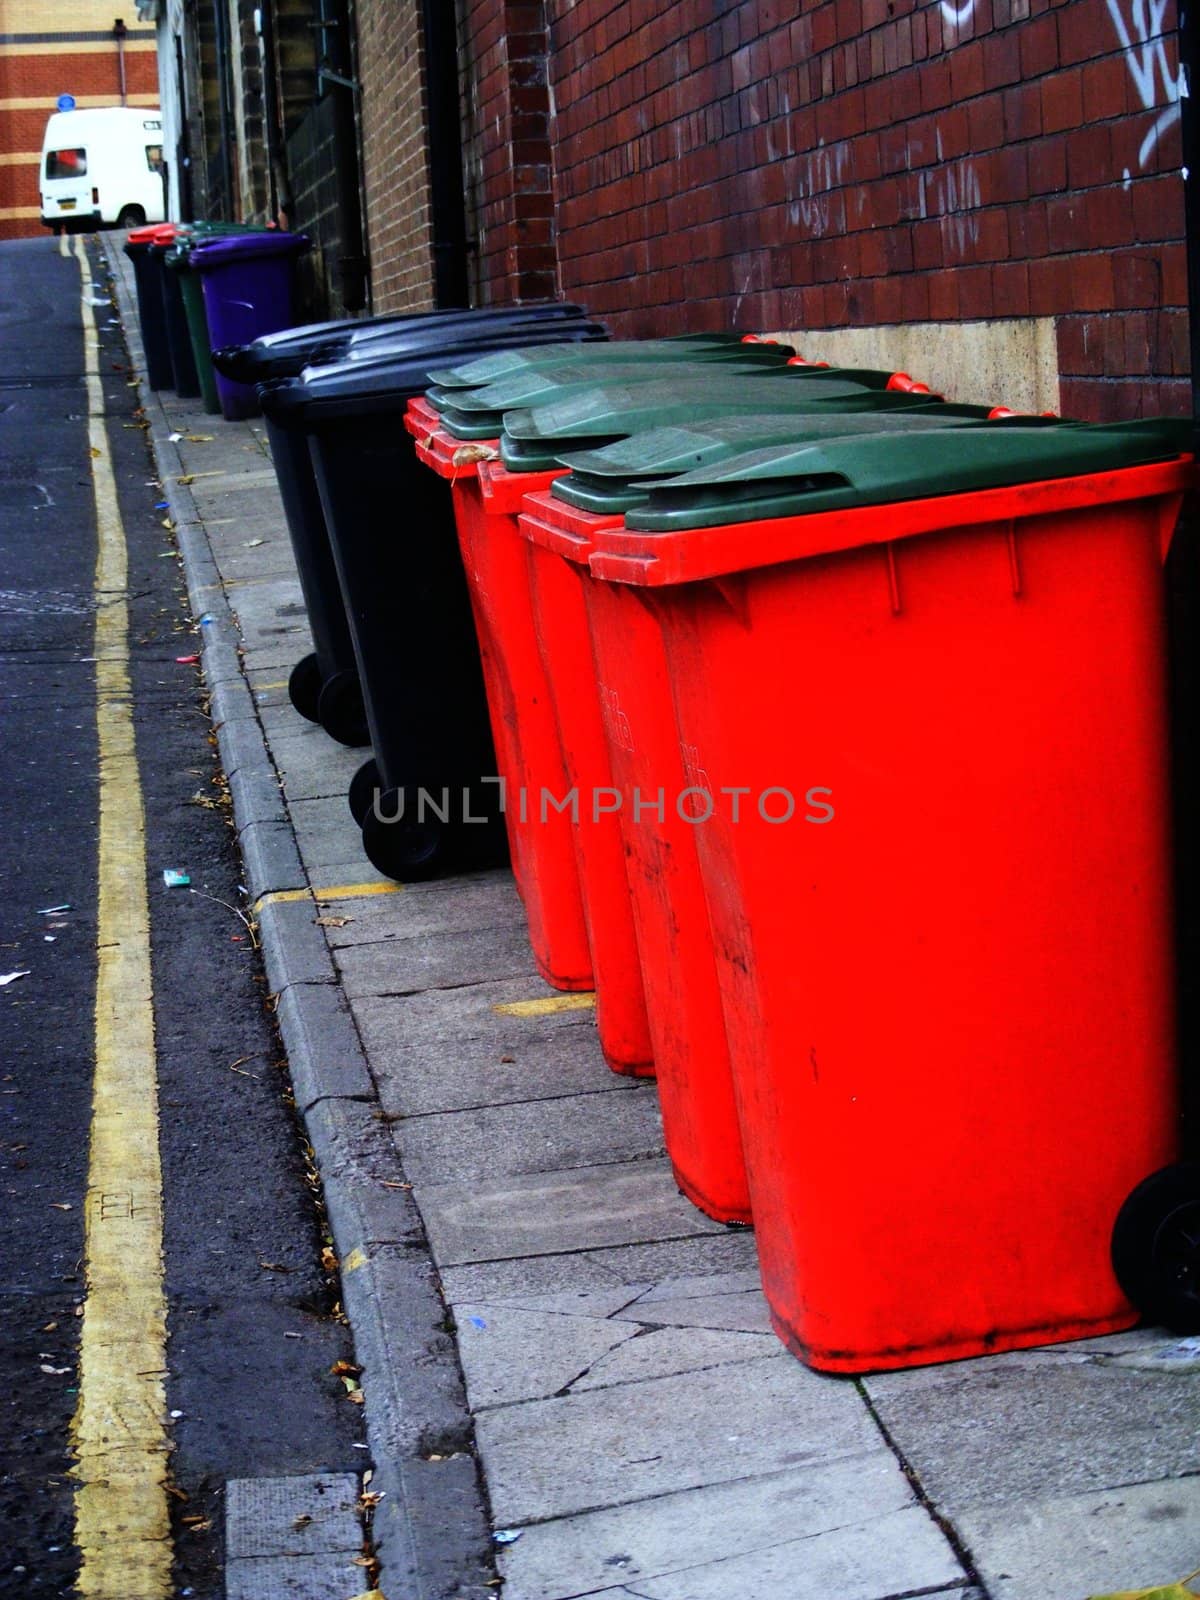 A photograph of street side red bins